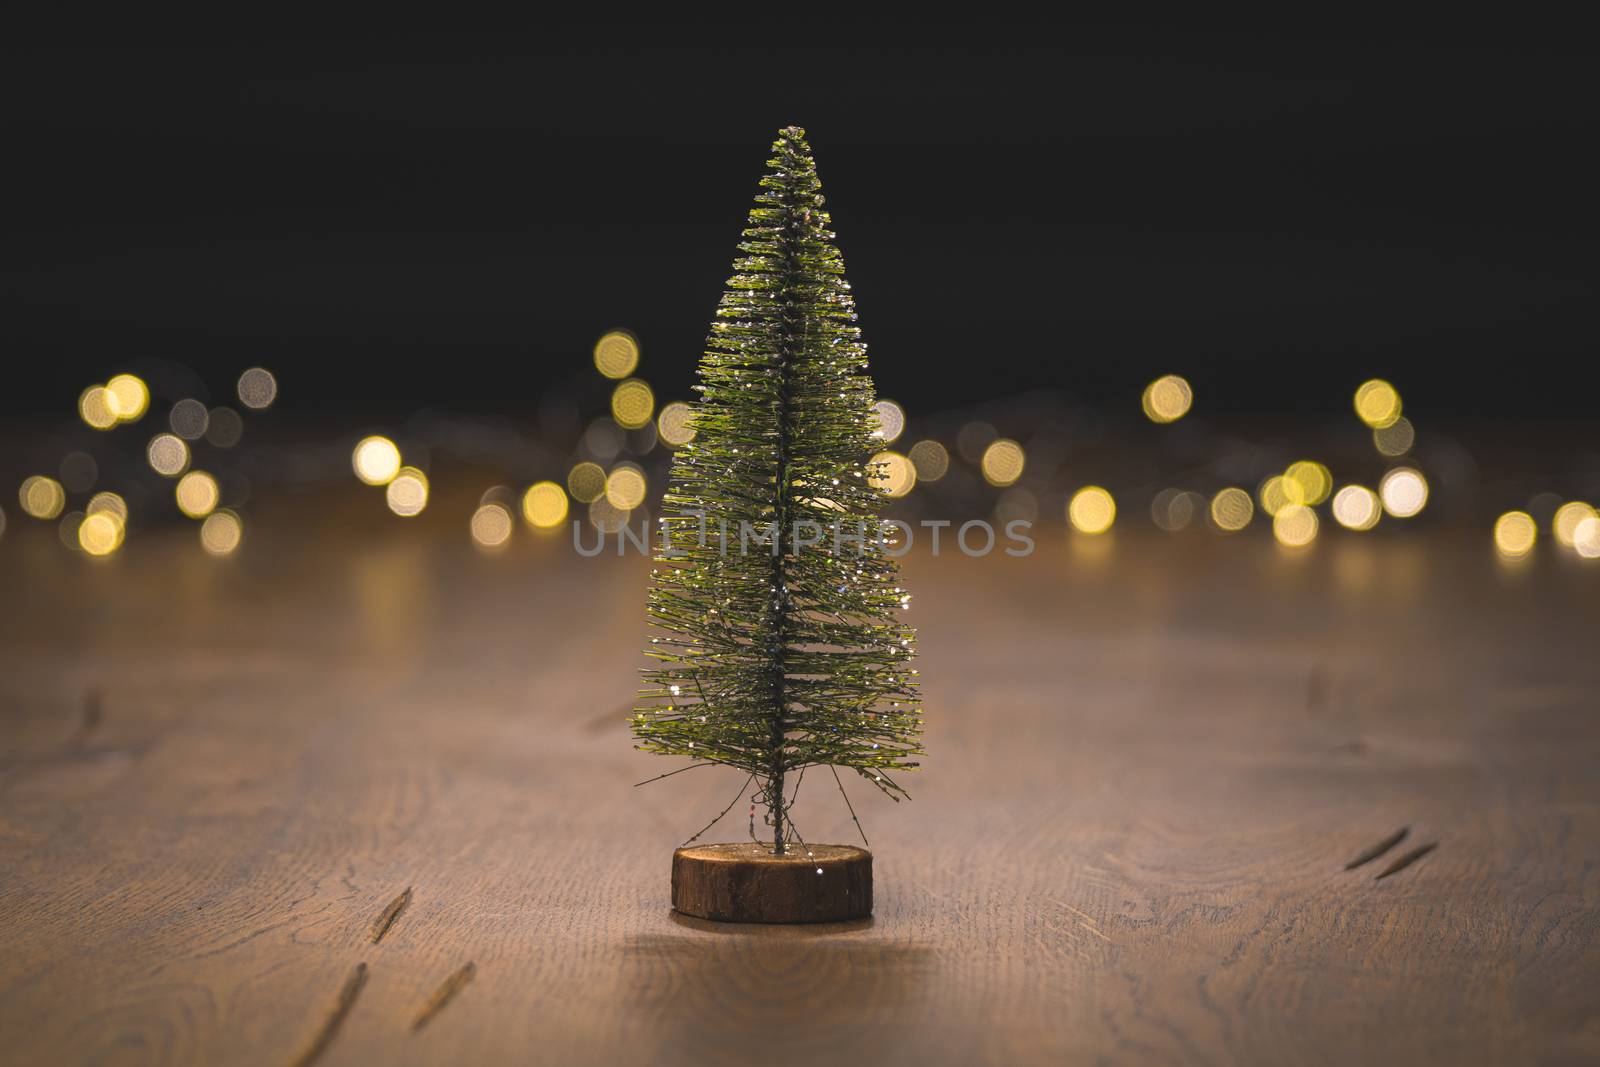 Christmas tree decoration on a wooden surface by Sportactive